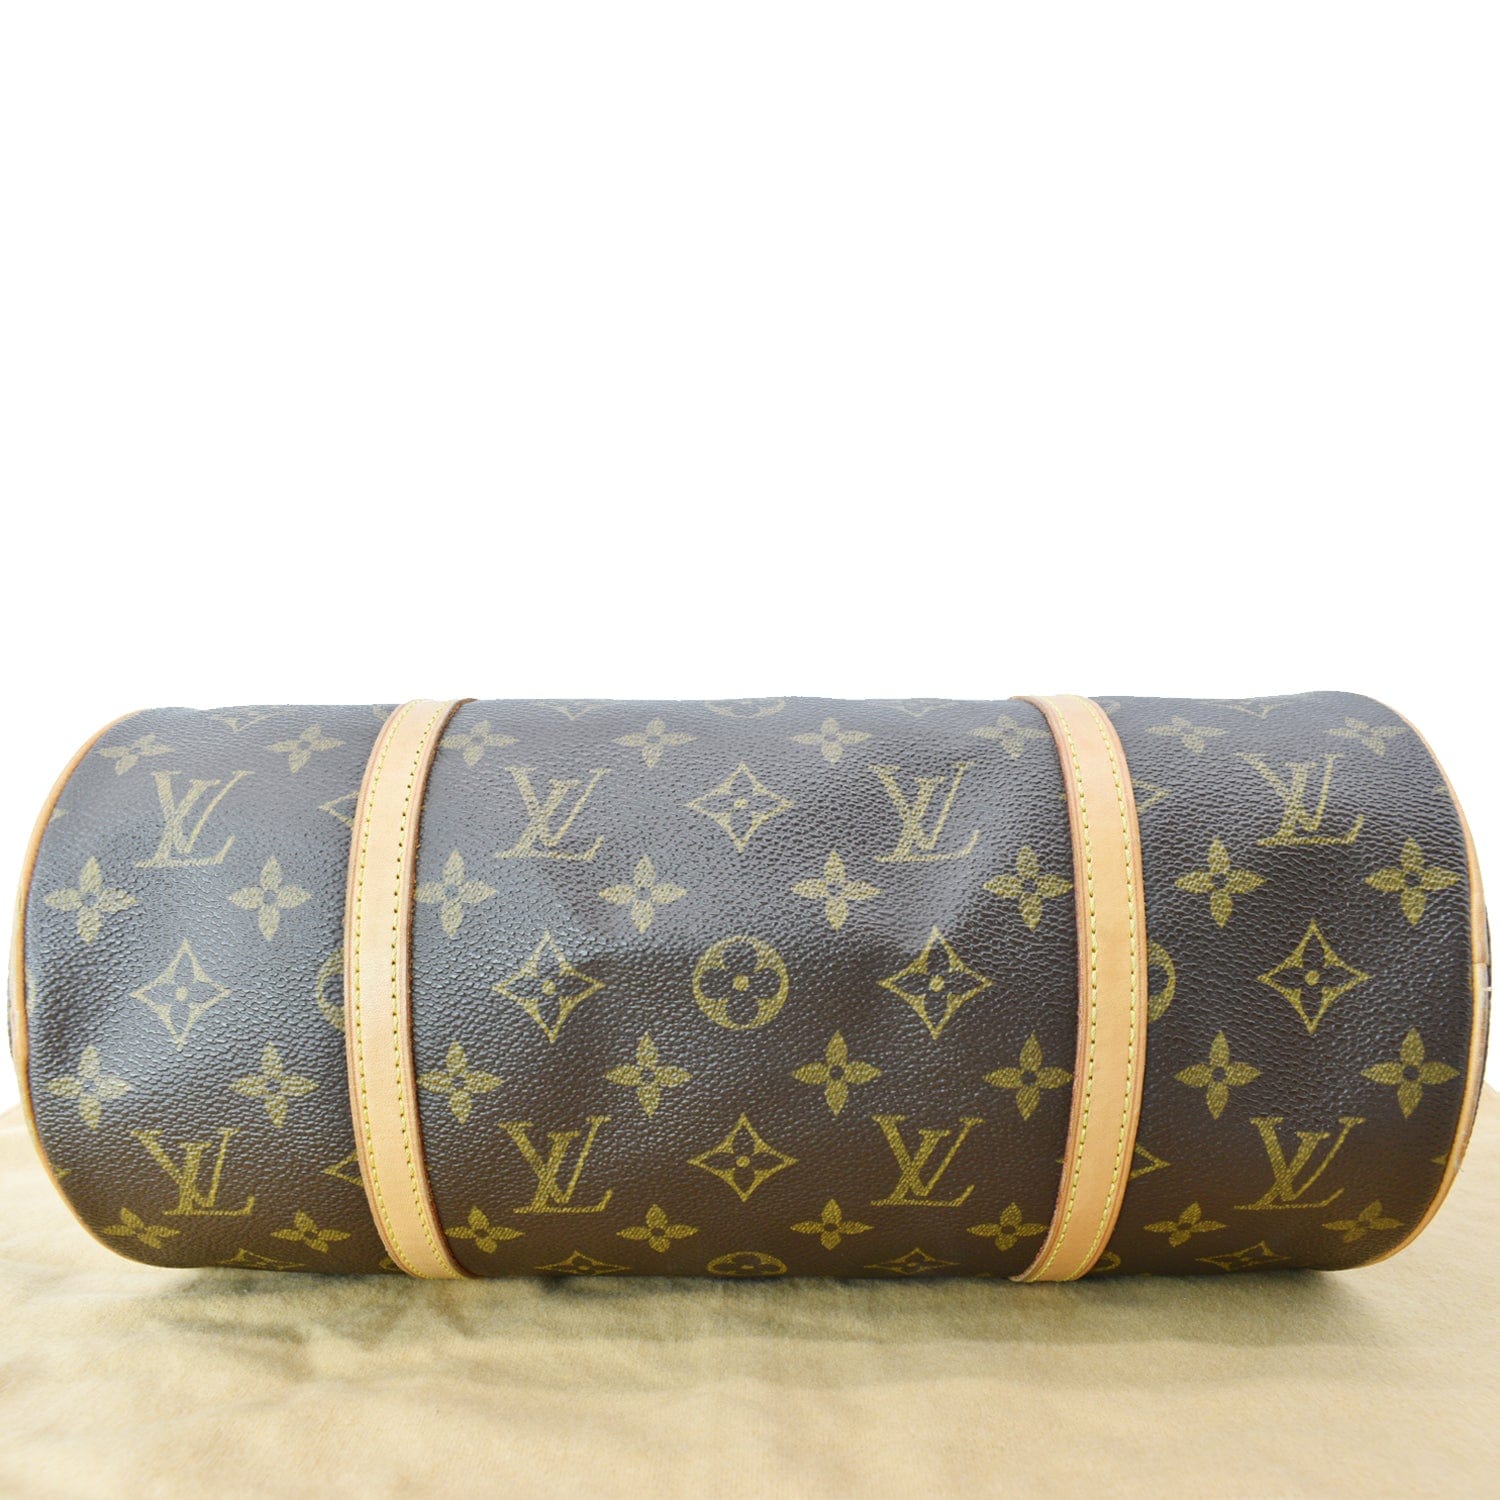 Louis Vuitton cylinder shaped monogrammed bag photographed on a